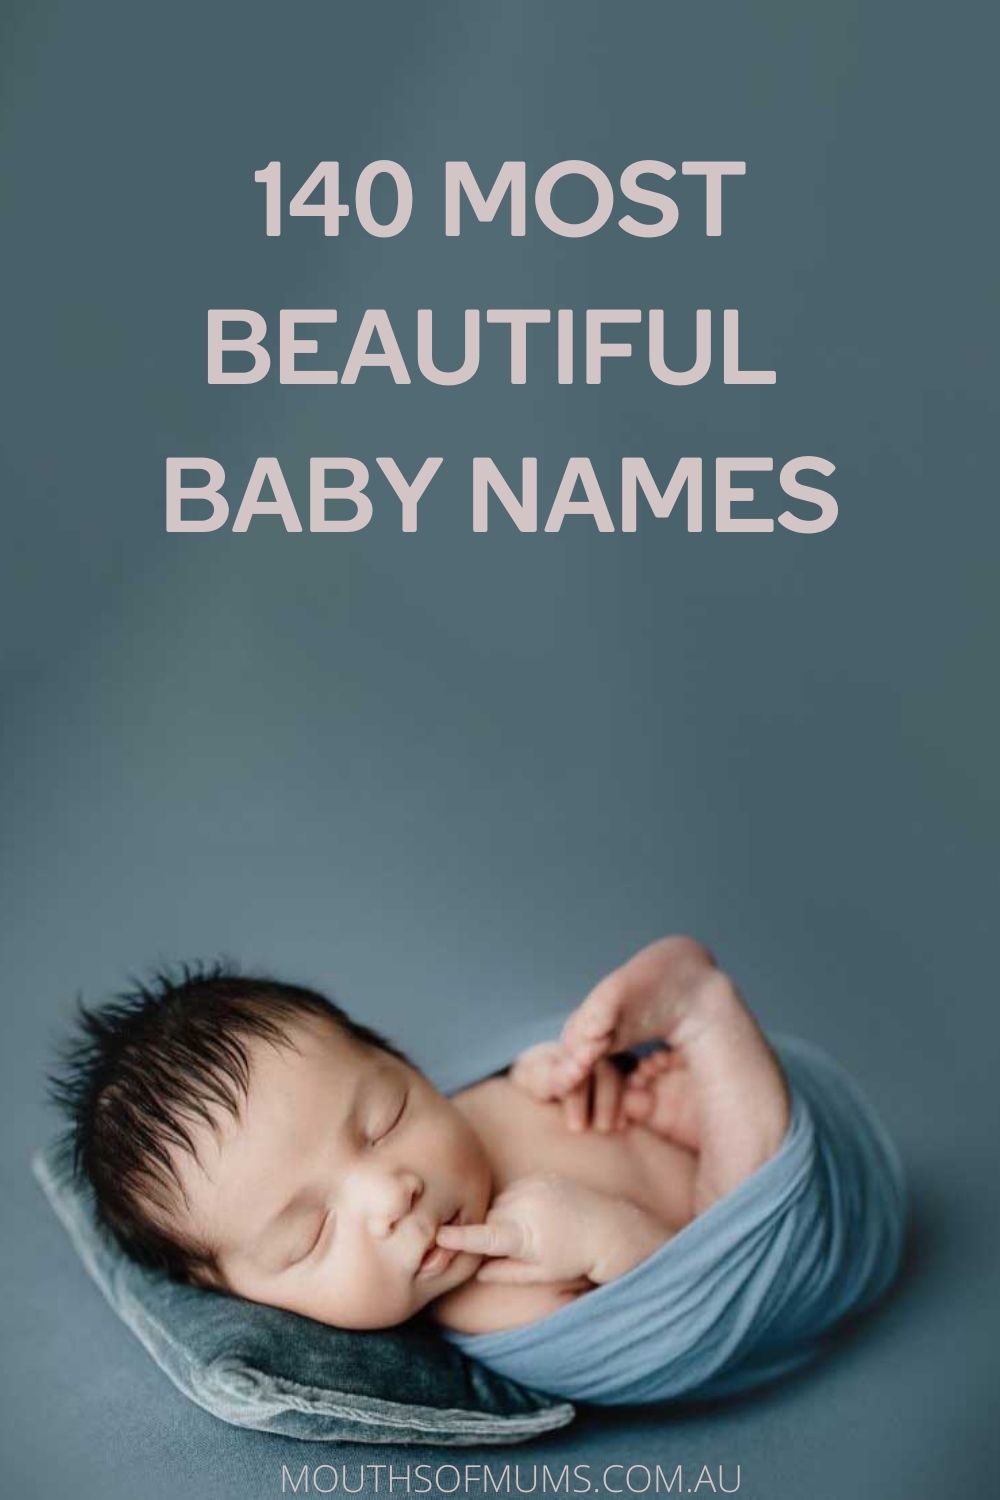 Most beautiful baby names